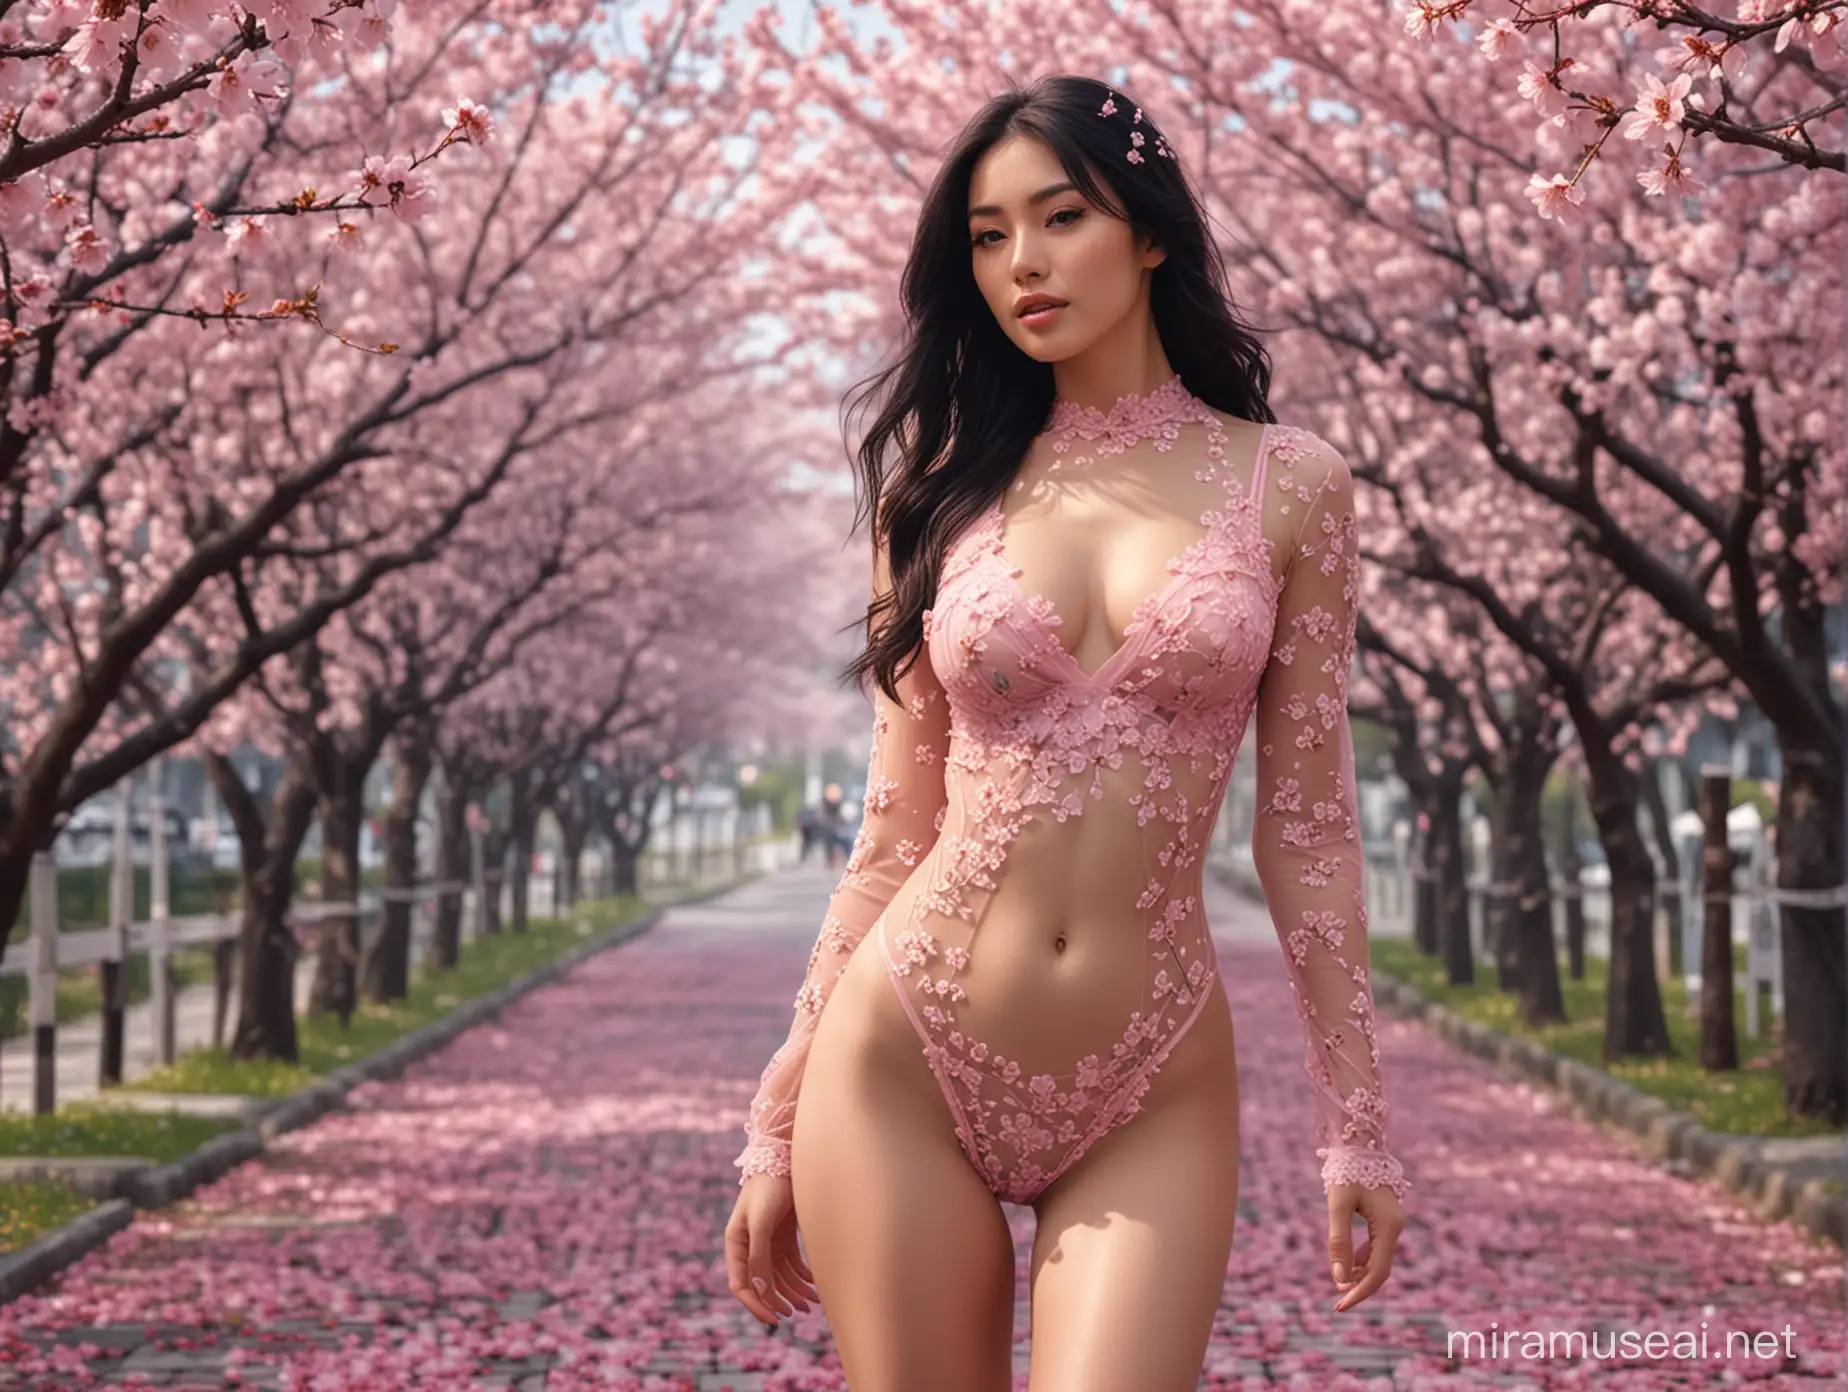 Gorgeous Woman amidst Sakura Cherry Blossom Trees in Pink Lace Bodysuit